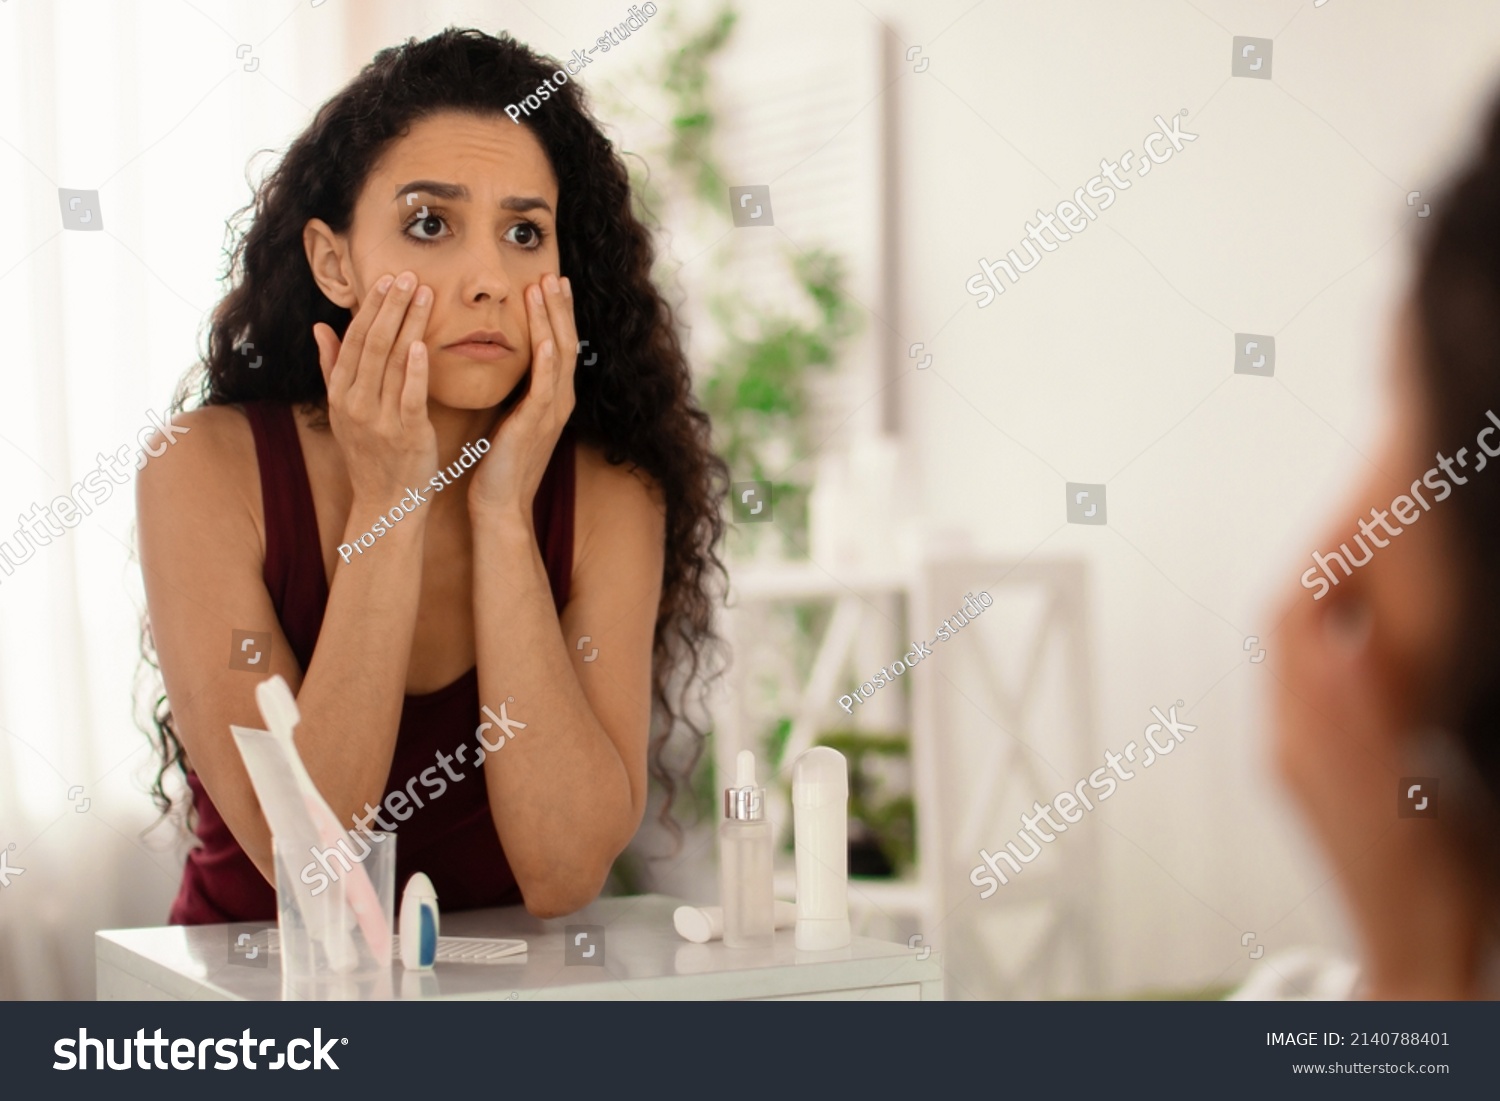 Beauty and skincare. Upset young woman looking in mirror and touching face, examining wrinkles and dark circles under her eyes at home, copy space. Dull tired skin concept #2140788401